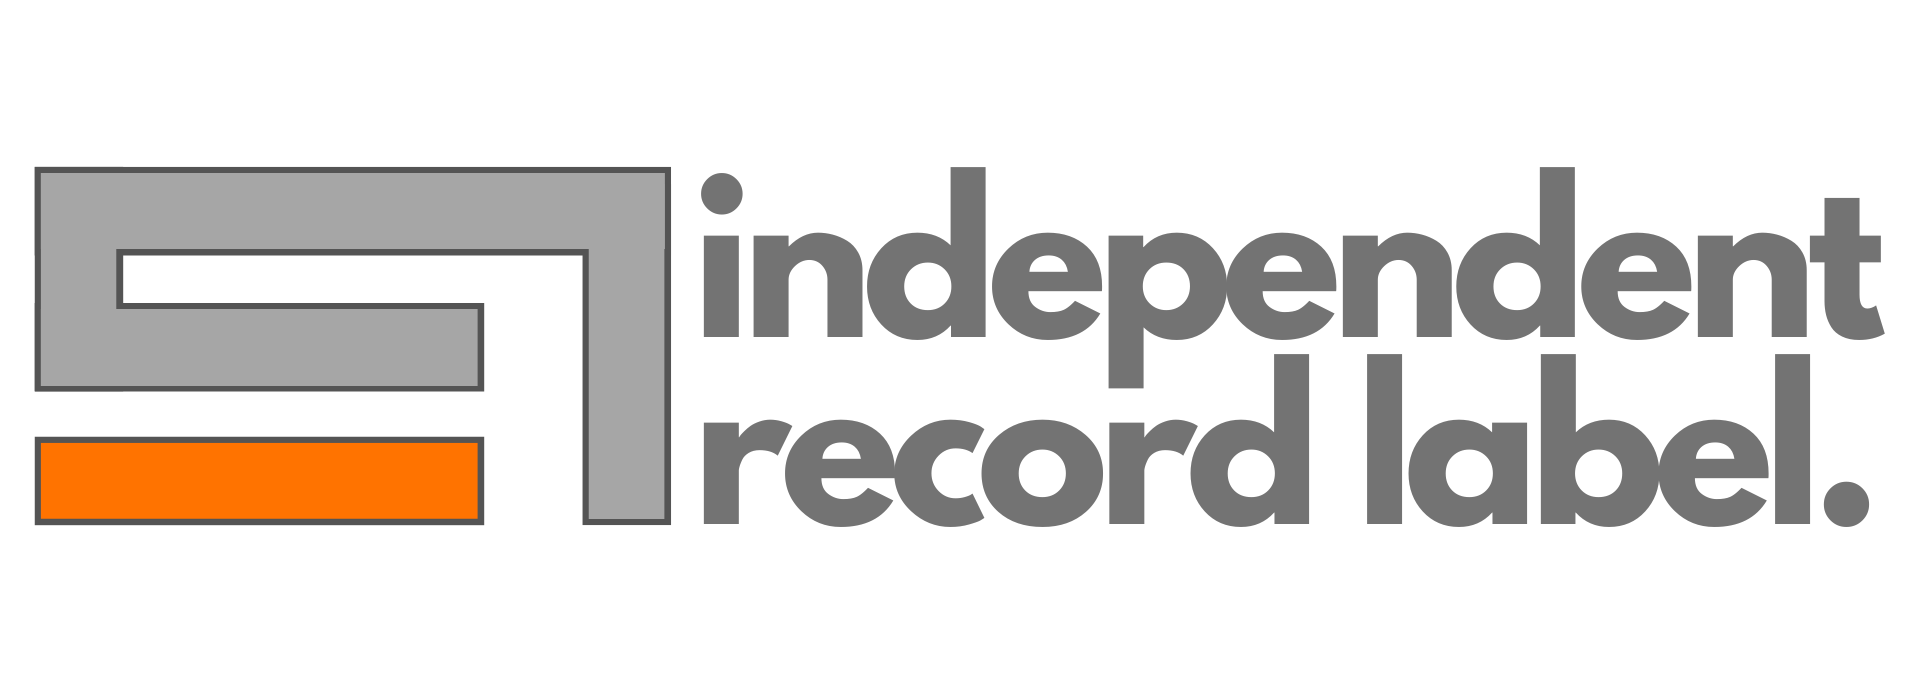 S7 Independent Record Label